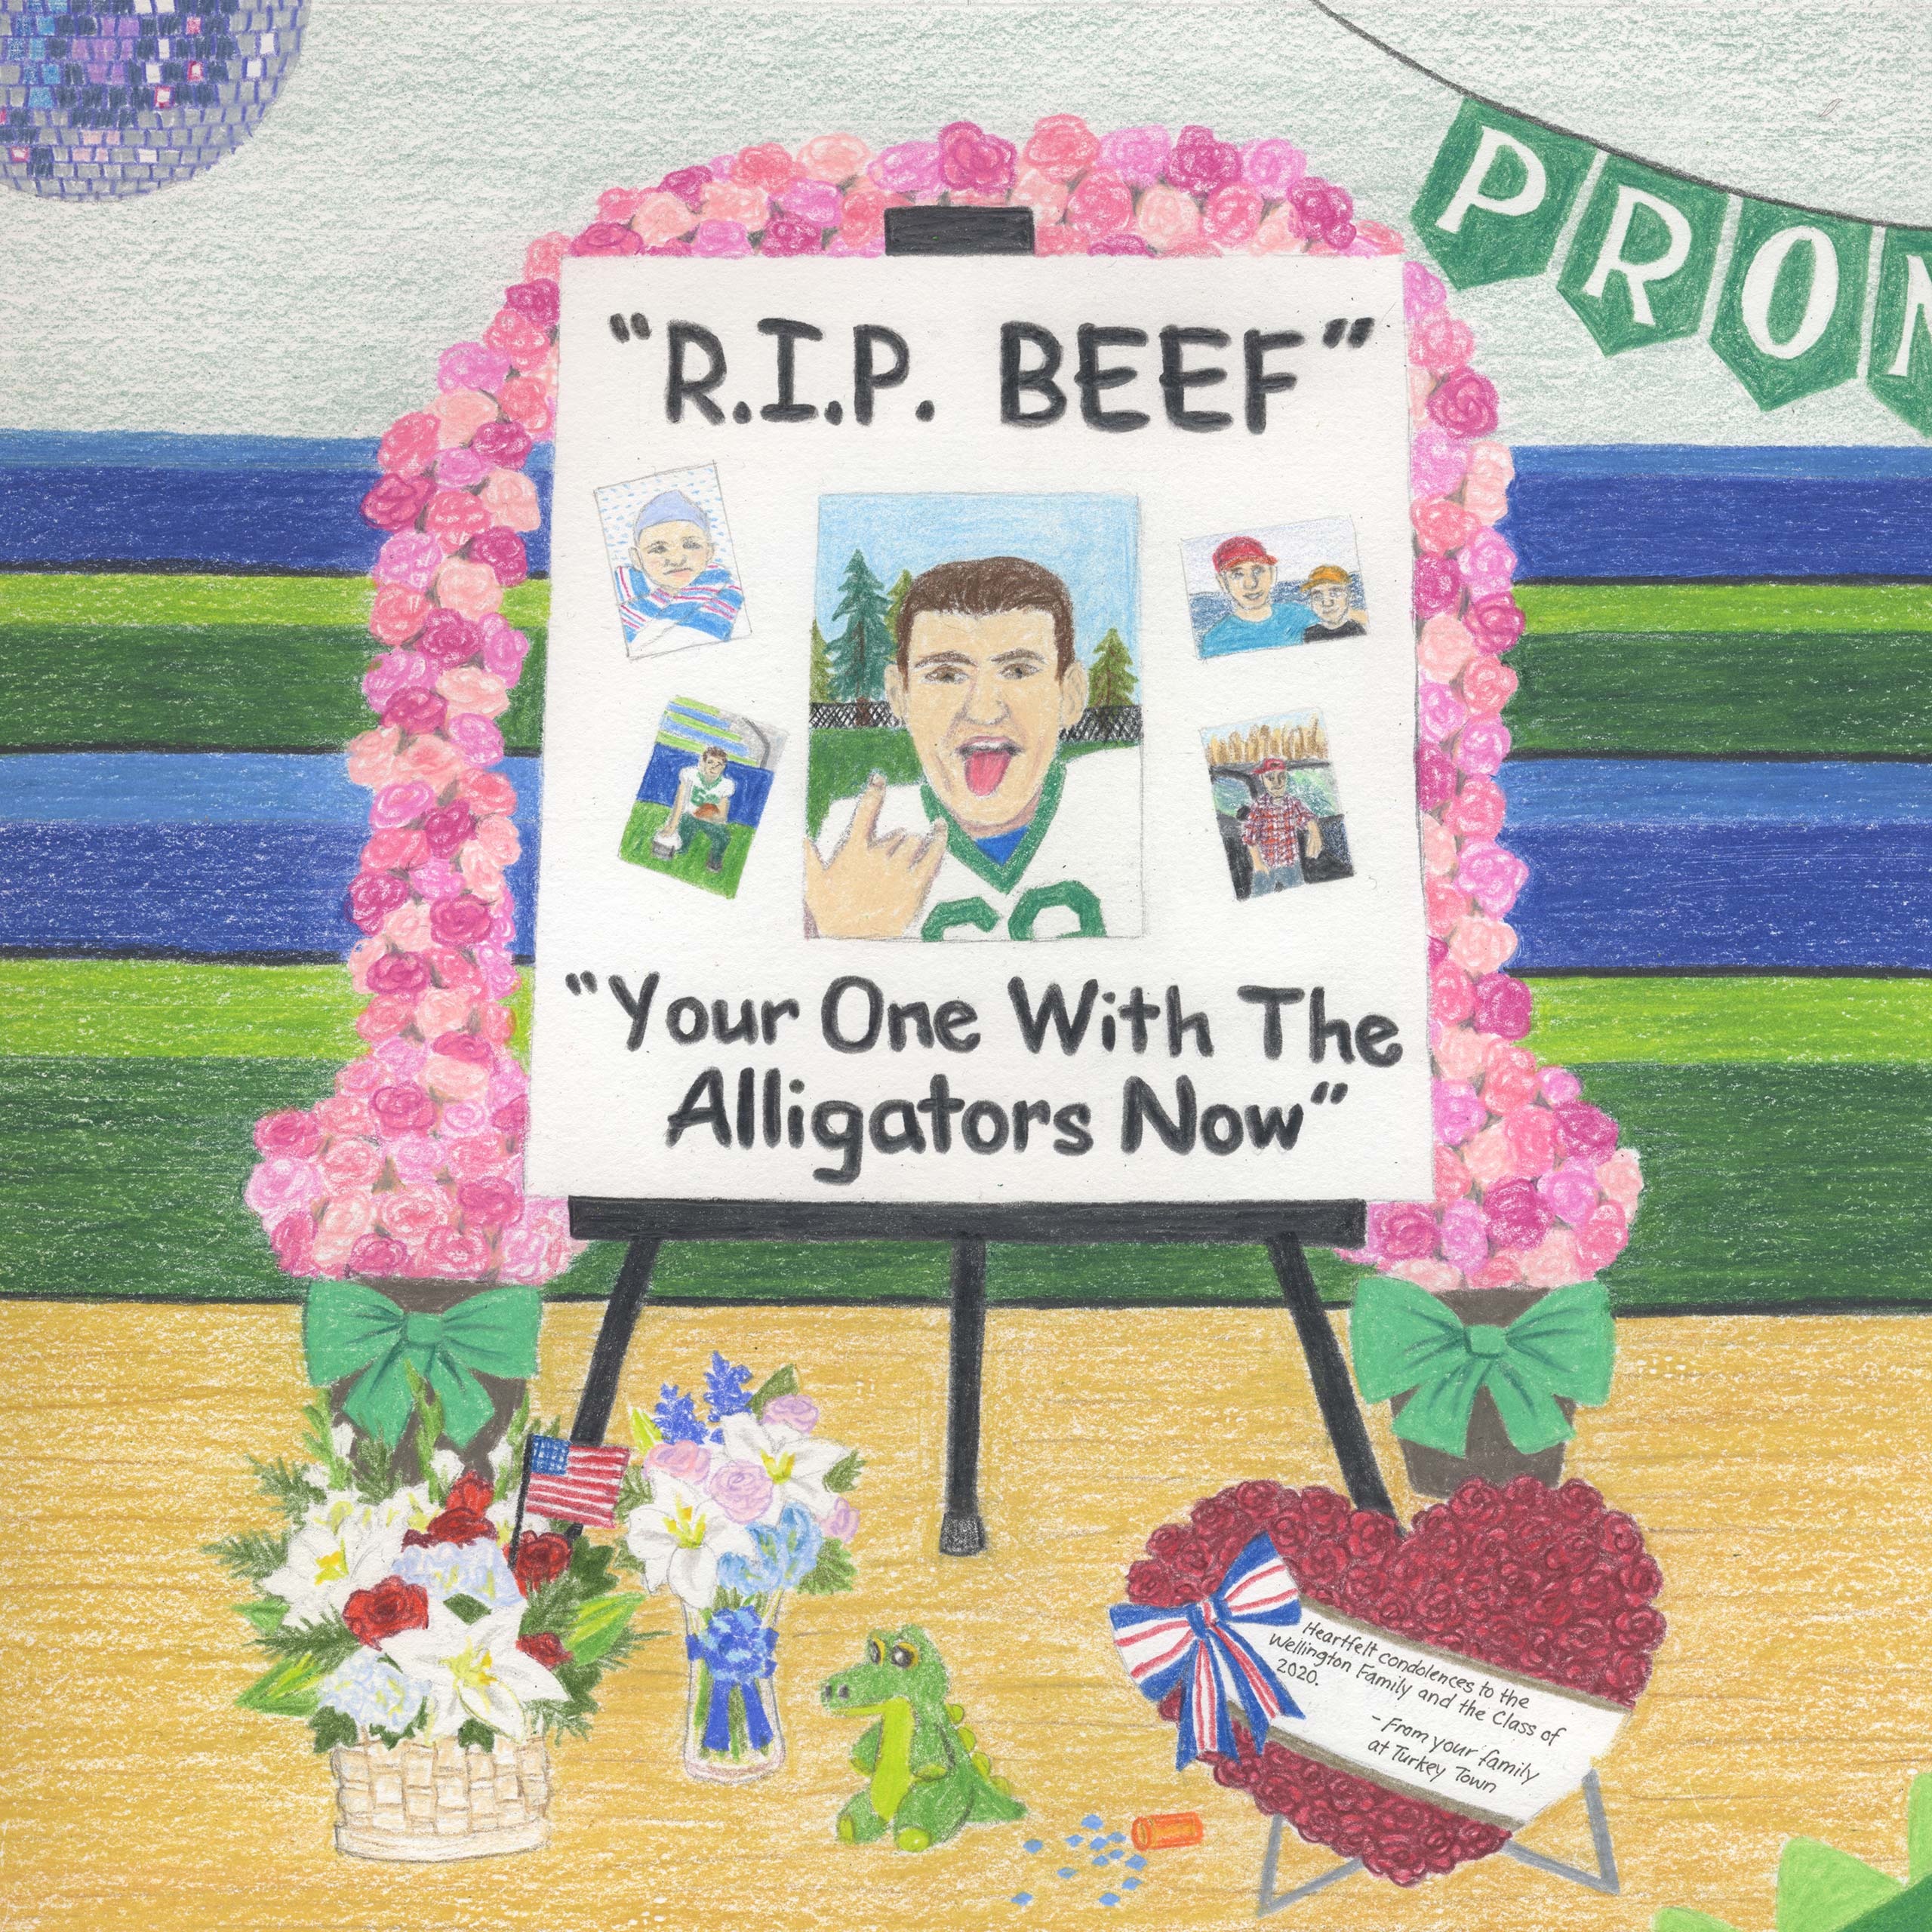 RIP Beef. Your one with the alligators now.